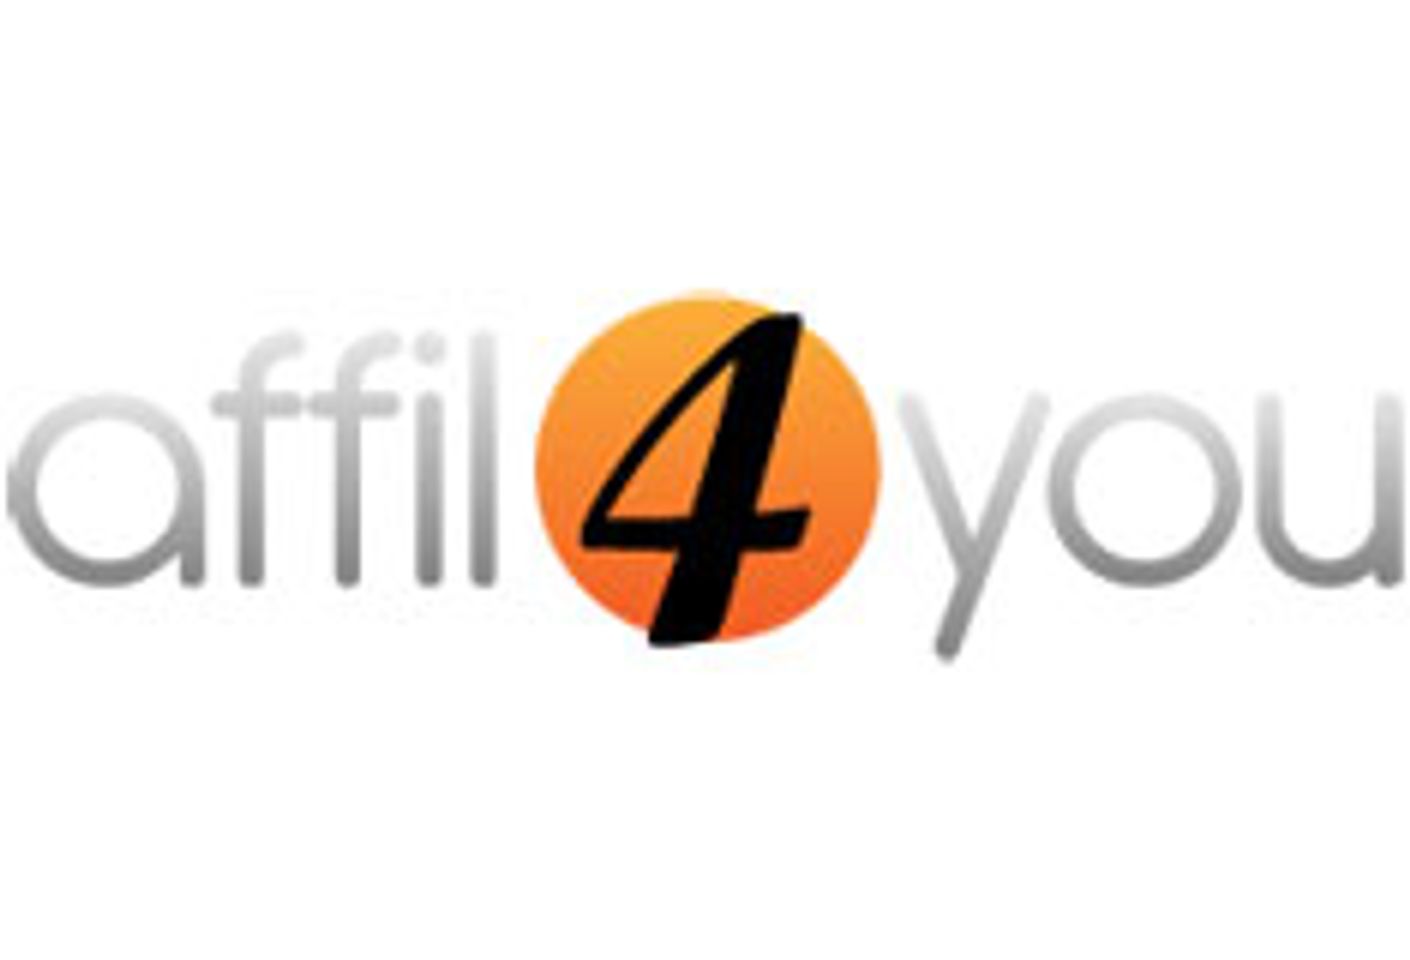 Affil4You Signs On As Corporate Sponsor Of ASACP